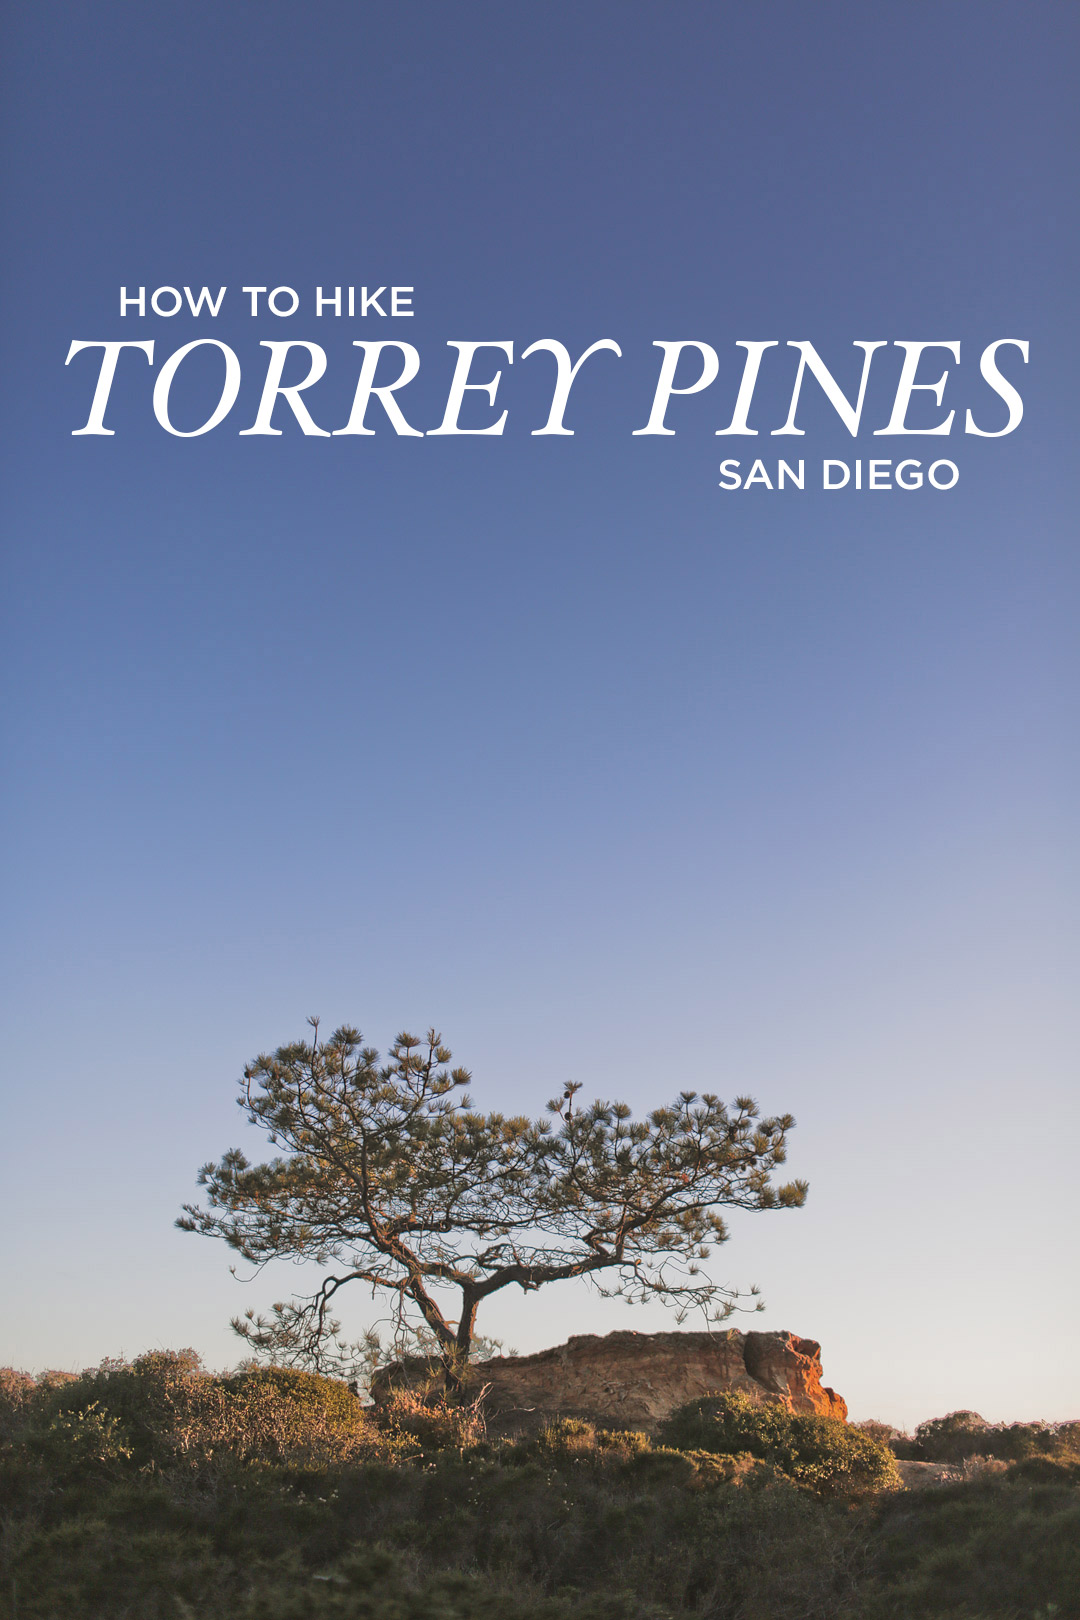 What You Need to Know About the Torrey Pines Hiking Trail in San Diego // Local Adventurer #sandiego #hiking #california #torreypines